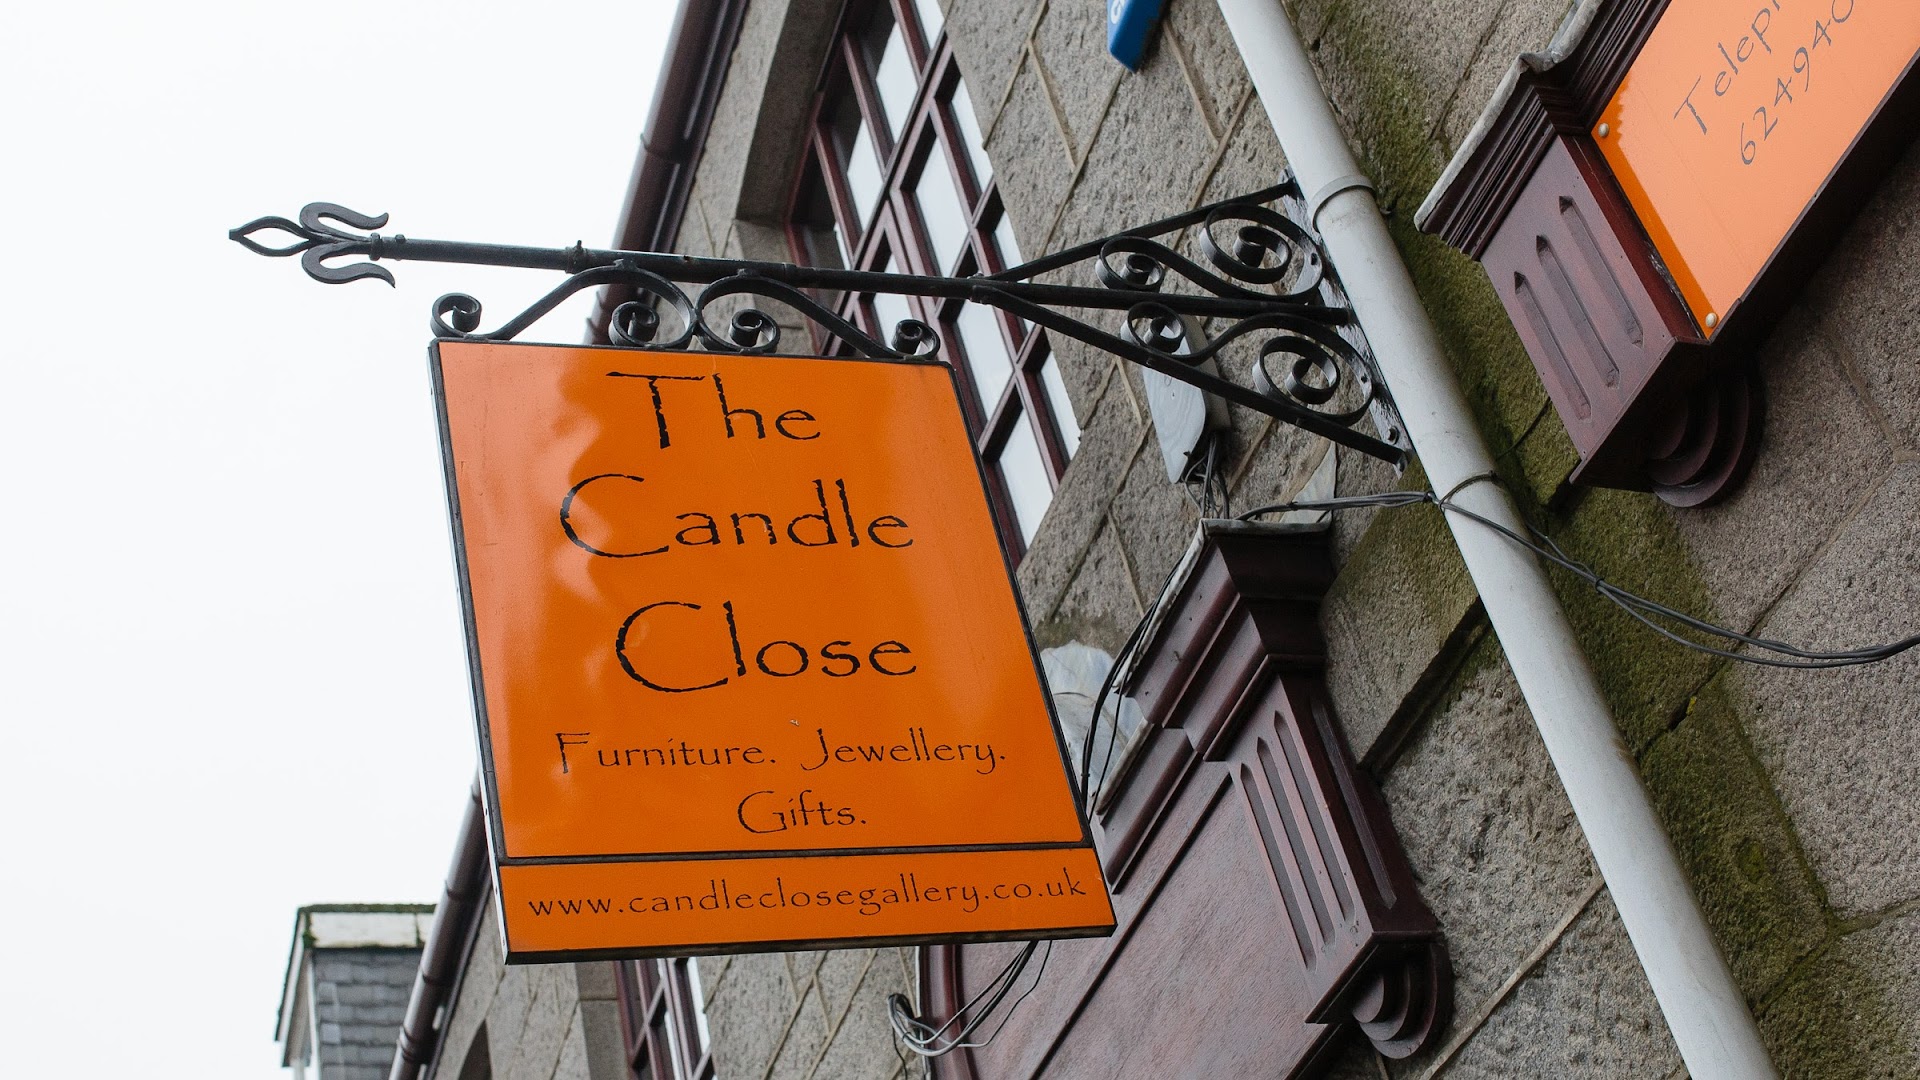 Candle Close Gallery